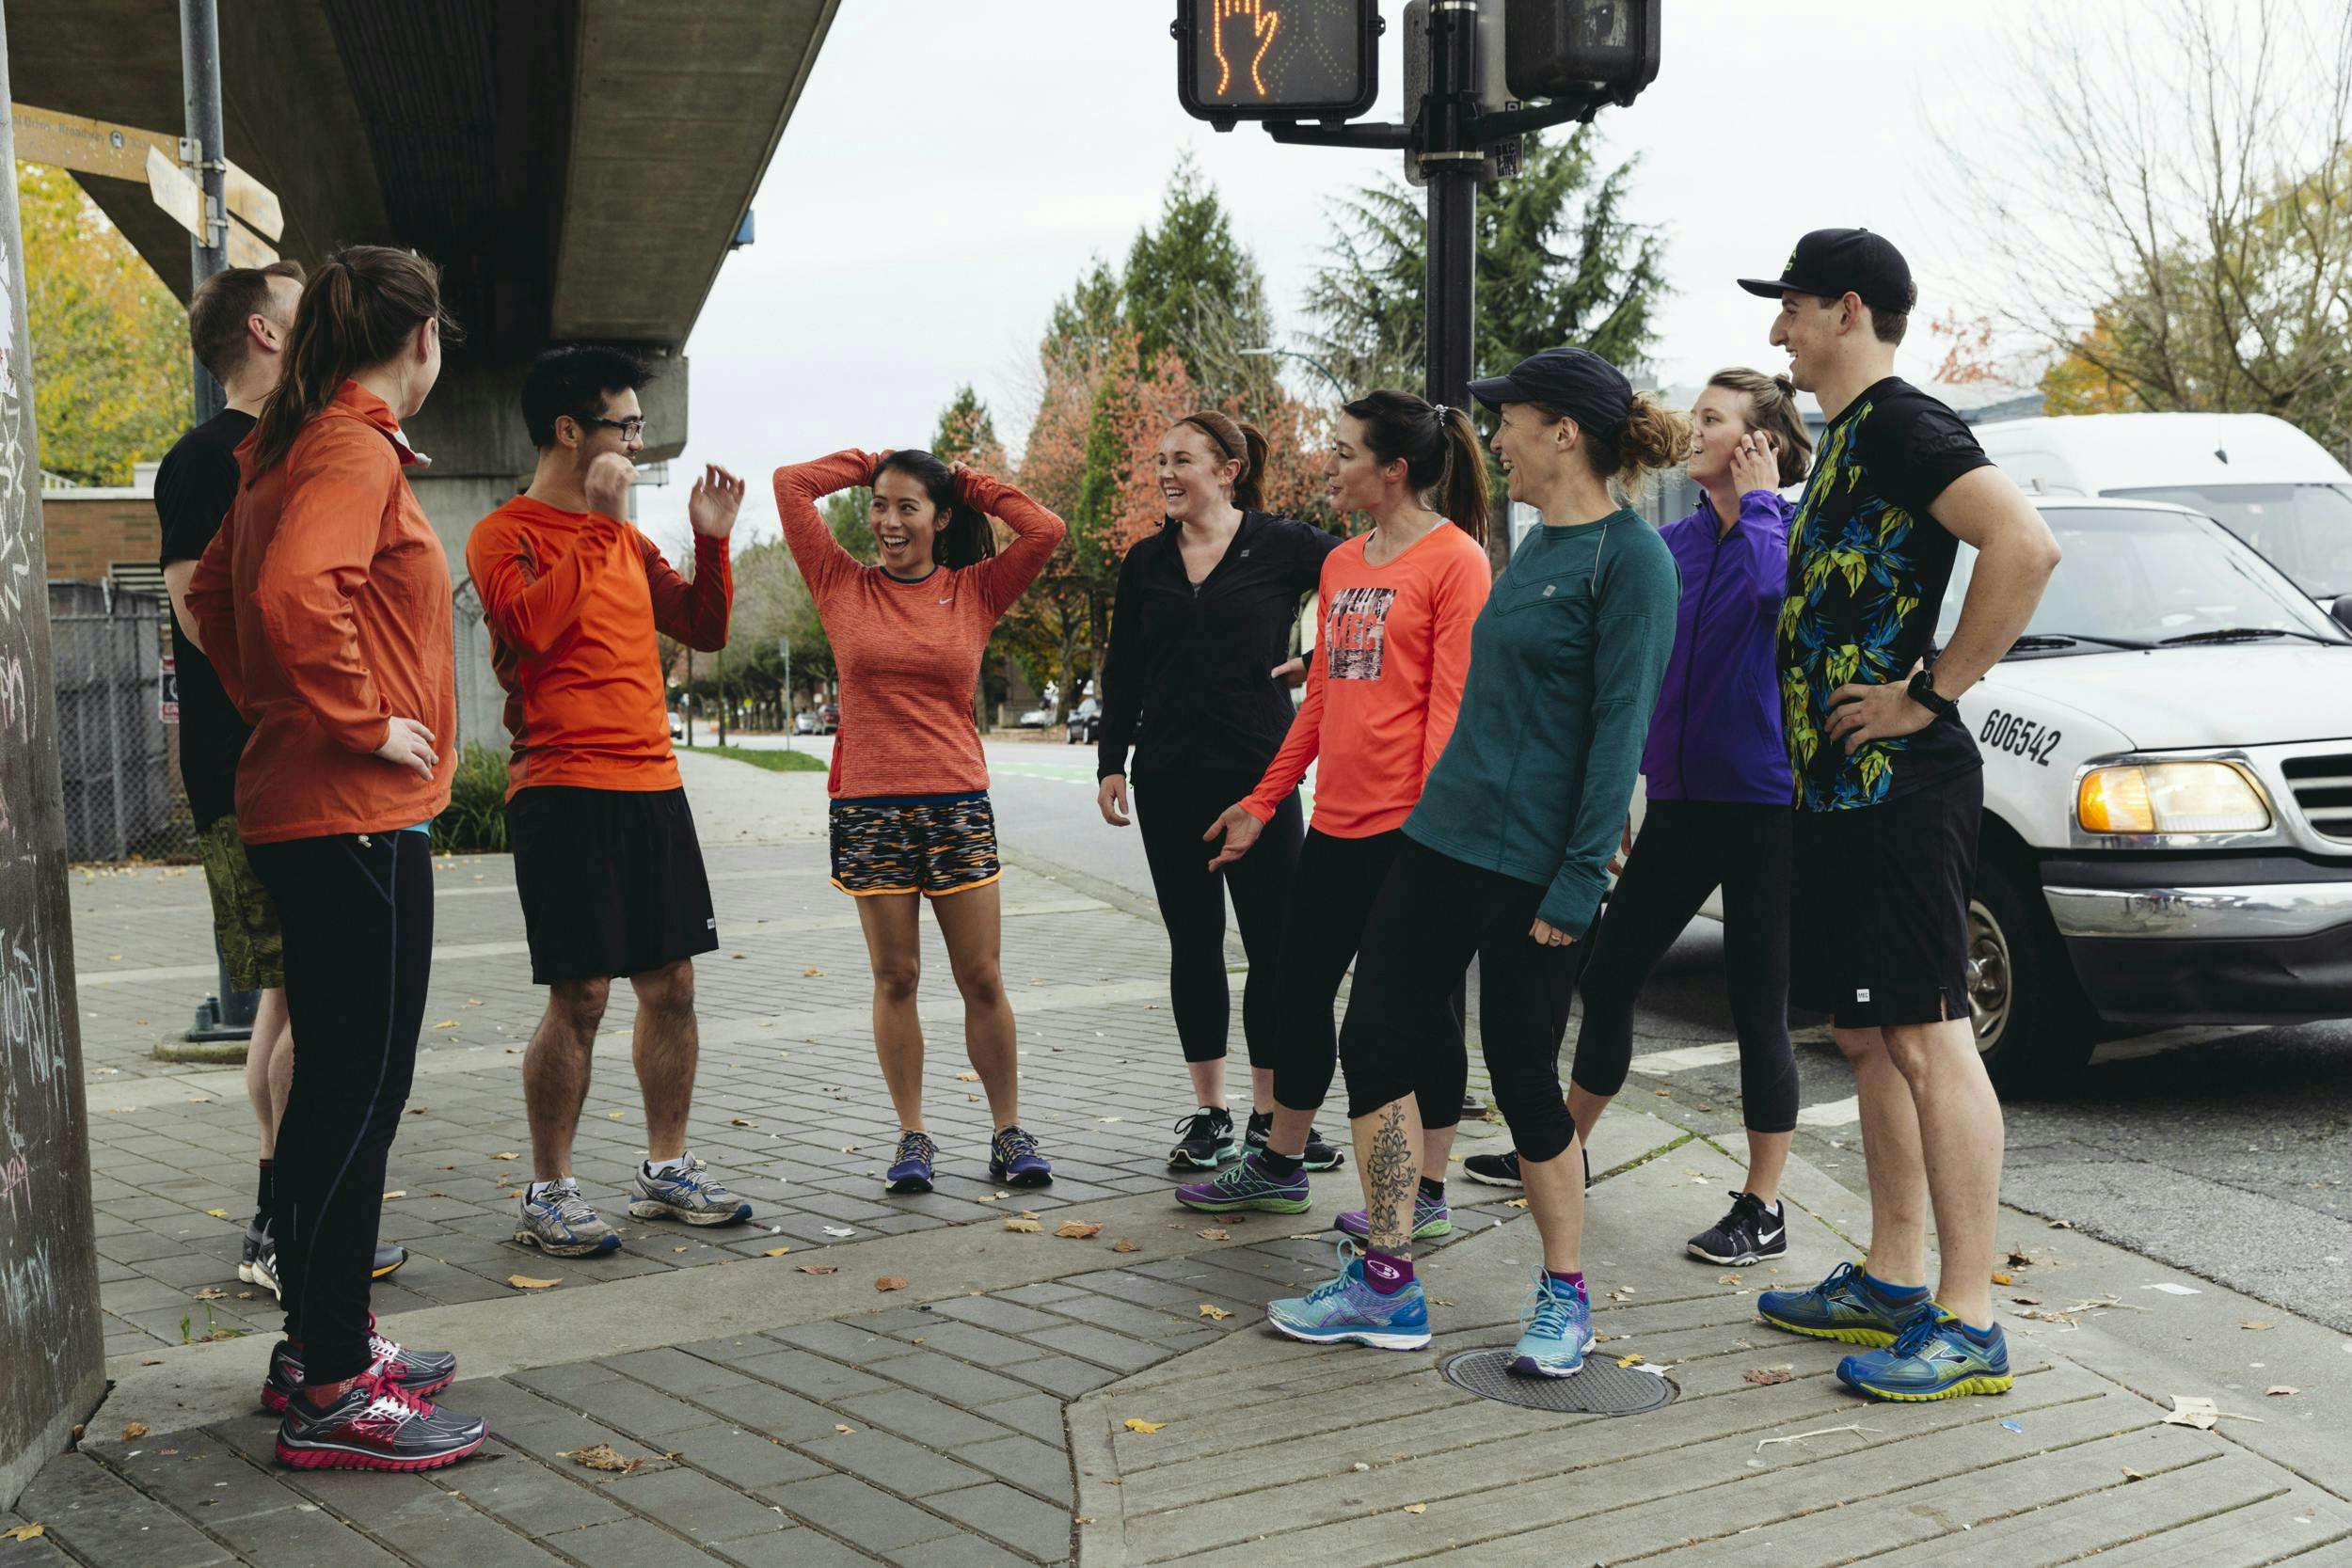 Crew of runners waiting at an intersection